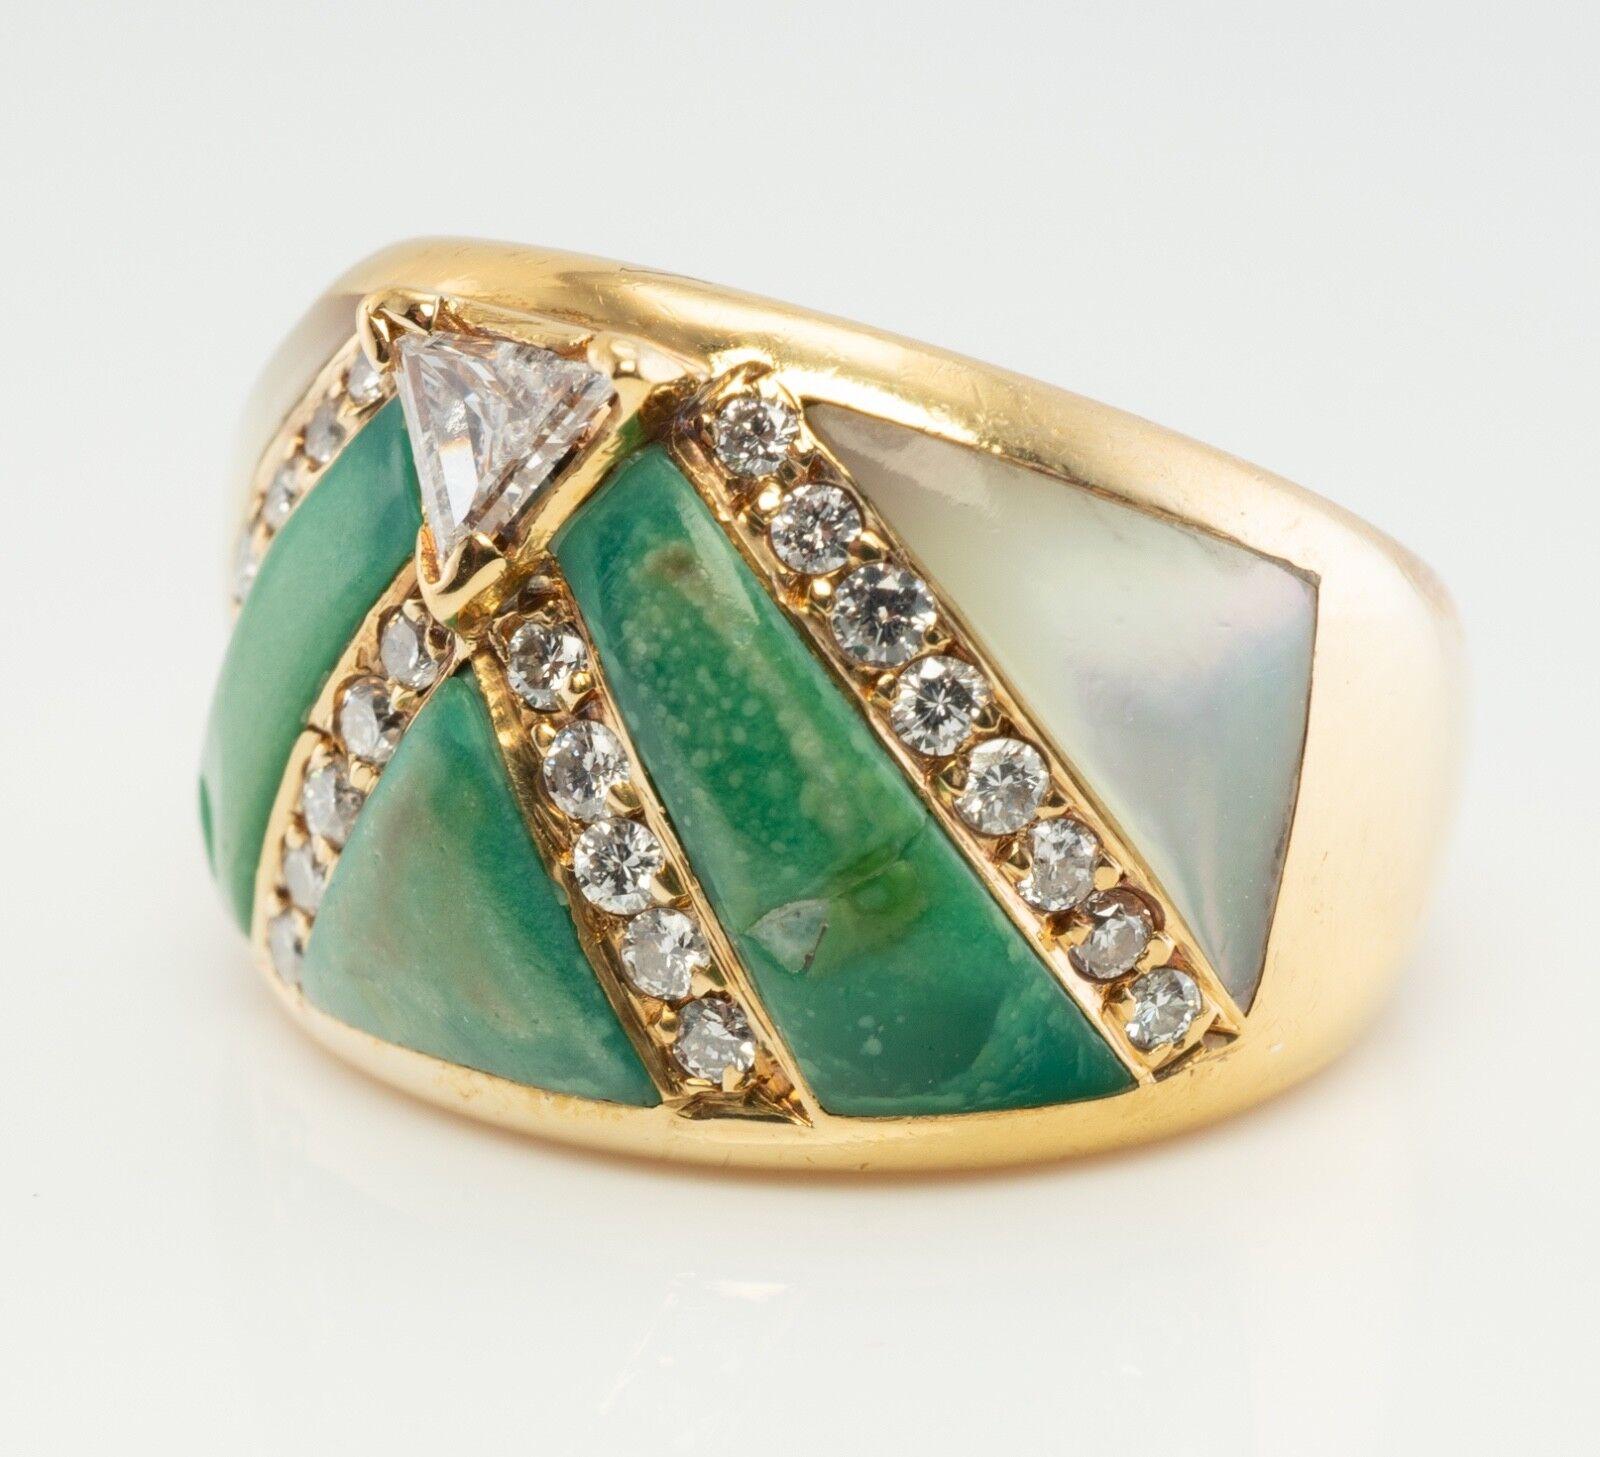 This beautiful estate ring is finely crafted in solid 18K Yellow Gold and set with genuine Turquoise, Mother of Pearl, and diamonds. The trillion cut diamond is .50 carat of VVS2 clarity and G color. Twenty-six round brilliant cut diamonds total .39